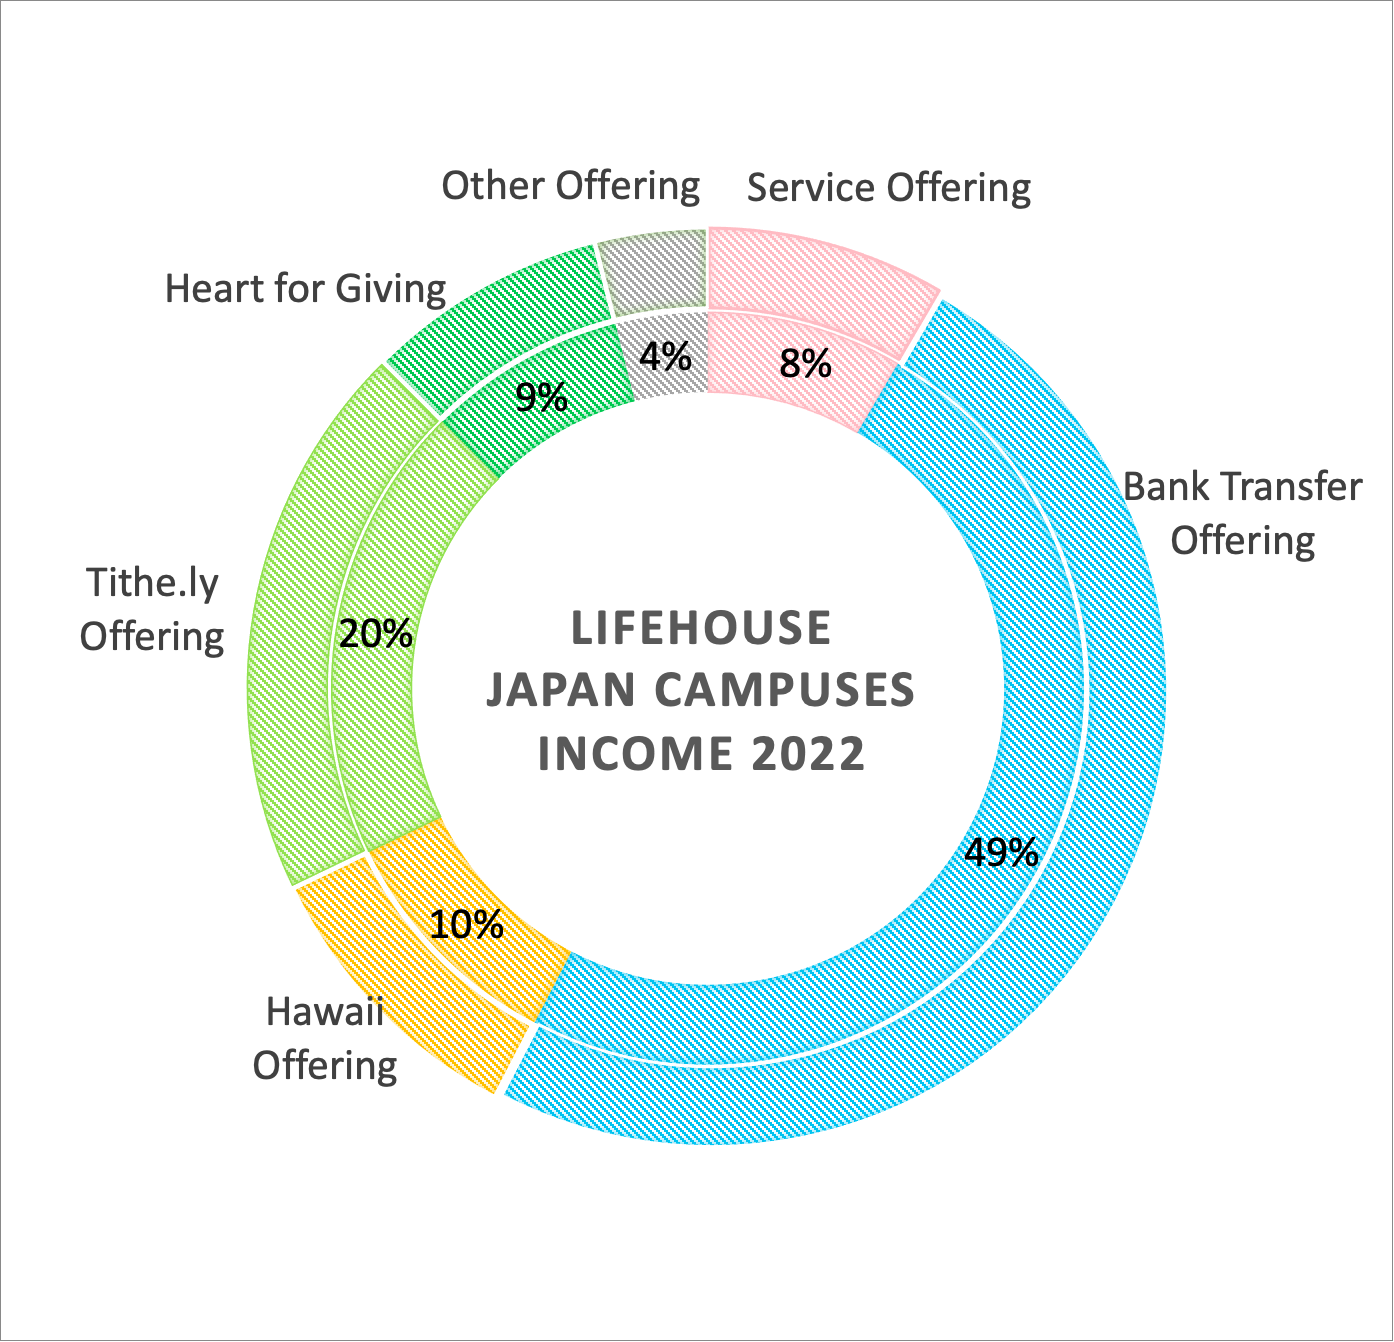 Lifehouse Japan Campuses Income 2022